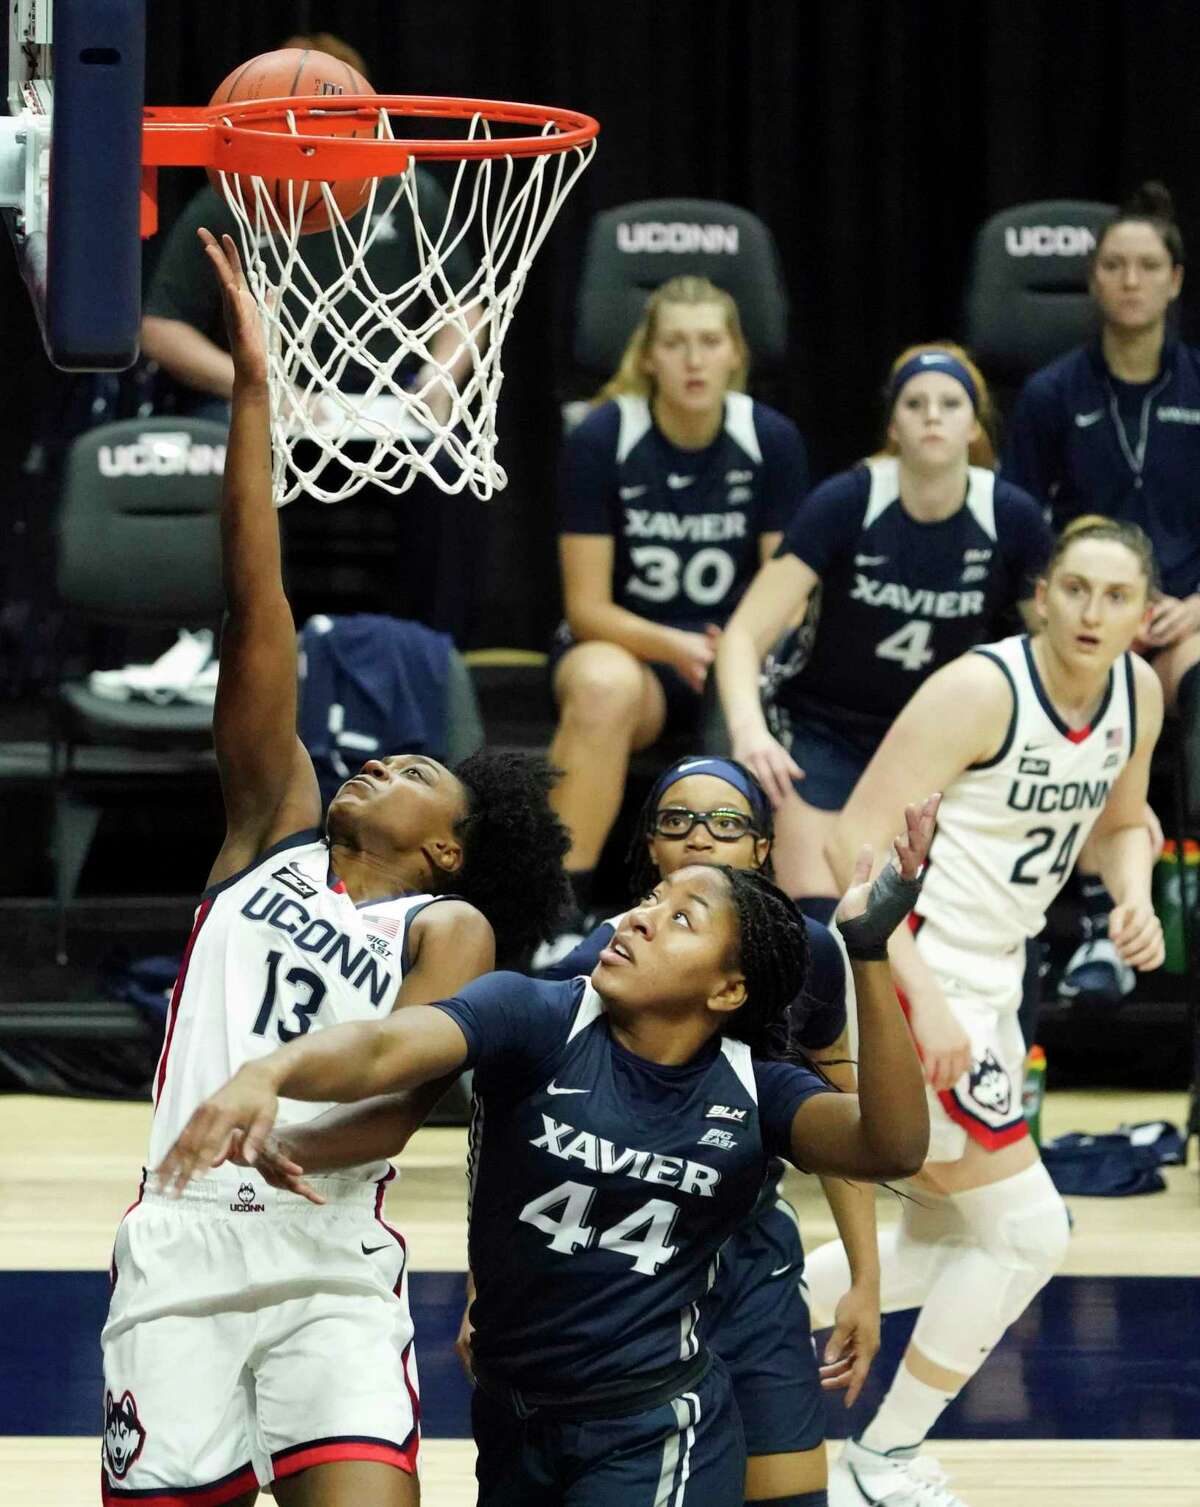 UConn guard Christyn Williams (13) shoots and is fouled by Xavier forward Ayanna Townsend (44) in Saturday’s game in Storrs. Williams led all scorers with 24 points on 8-for-11 shooting and was 4 for 5 from 3-point range.